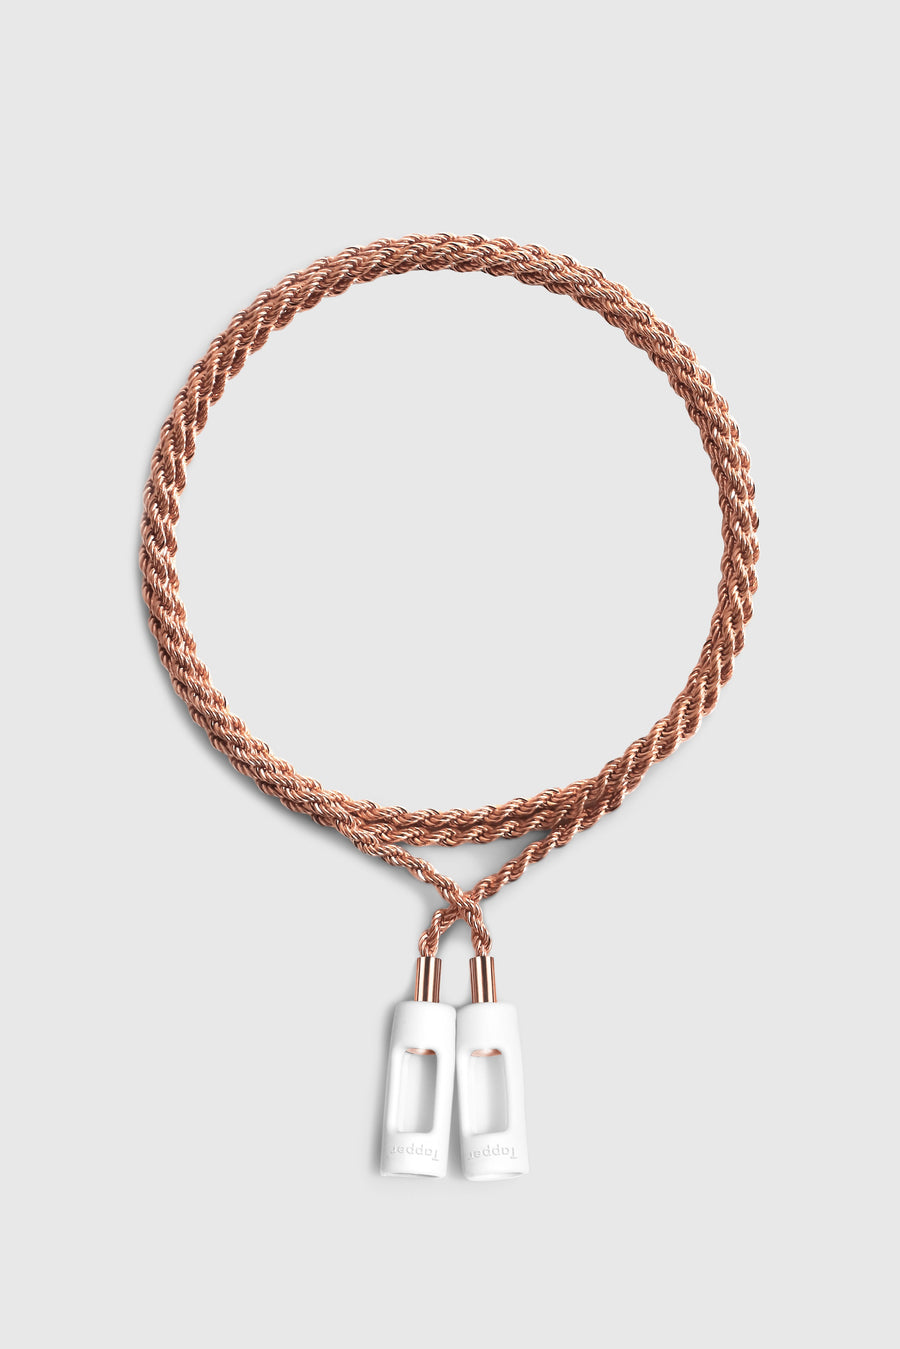 Tapper's real 18K rose gold plated original rope chain jewelry necklace protects your Apple AirPods & AirPods Pro. The luxurious, elevated & accessible rope chain jewellery plated in precious metals snaps the AirPods around your neck. Lost your AirPods? Magnetic lock for convenient and hassle-free safekeeping around your neck. The next must-have & affordable AirPods accessory crafted for ultimate luxury. Compatible with AirPods & AirPods Pro. Designed in Sweden by Tapper. Free Shipping at gettapper.com